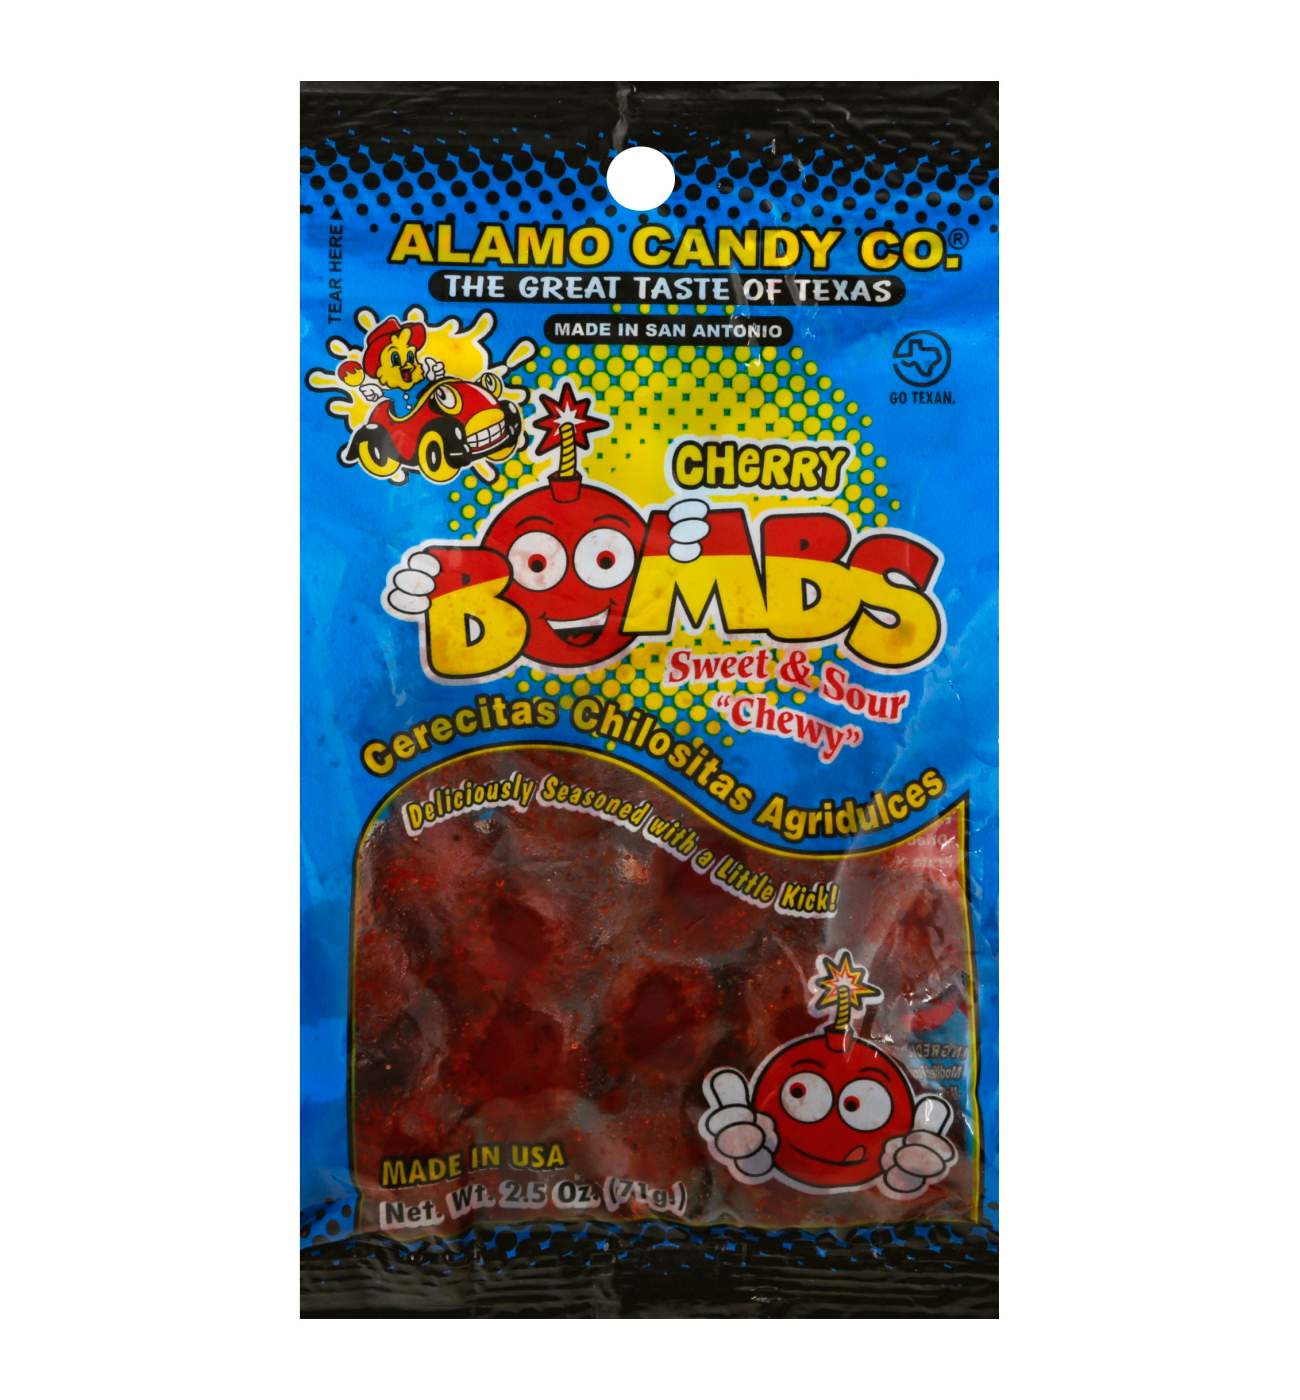 Alamo Candy Sweet & Sour Cherry Bombs ; image 1 of 3